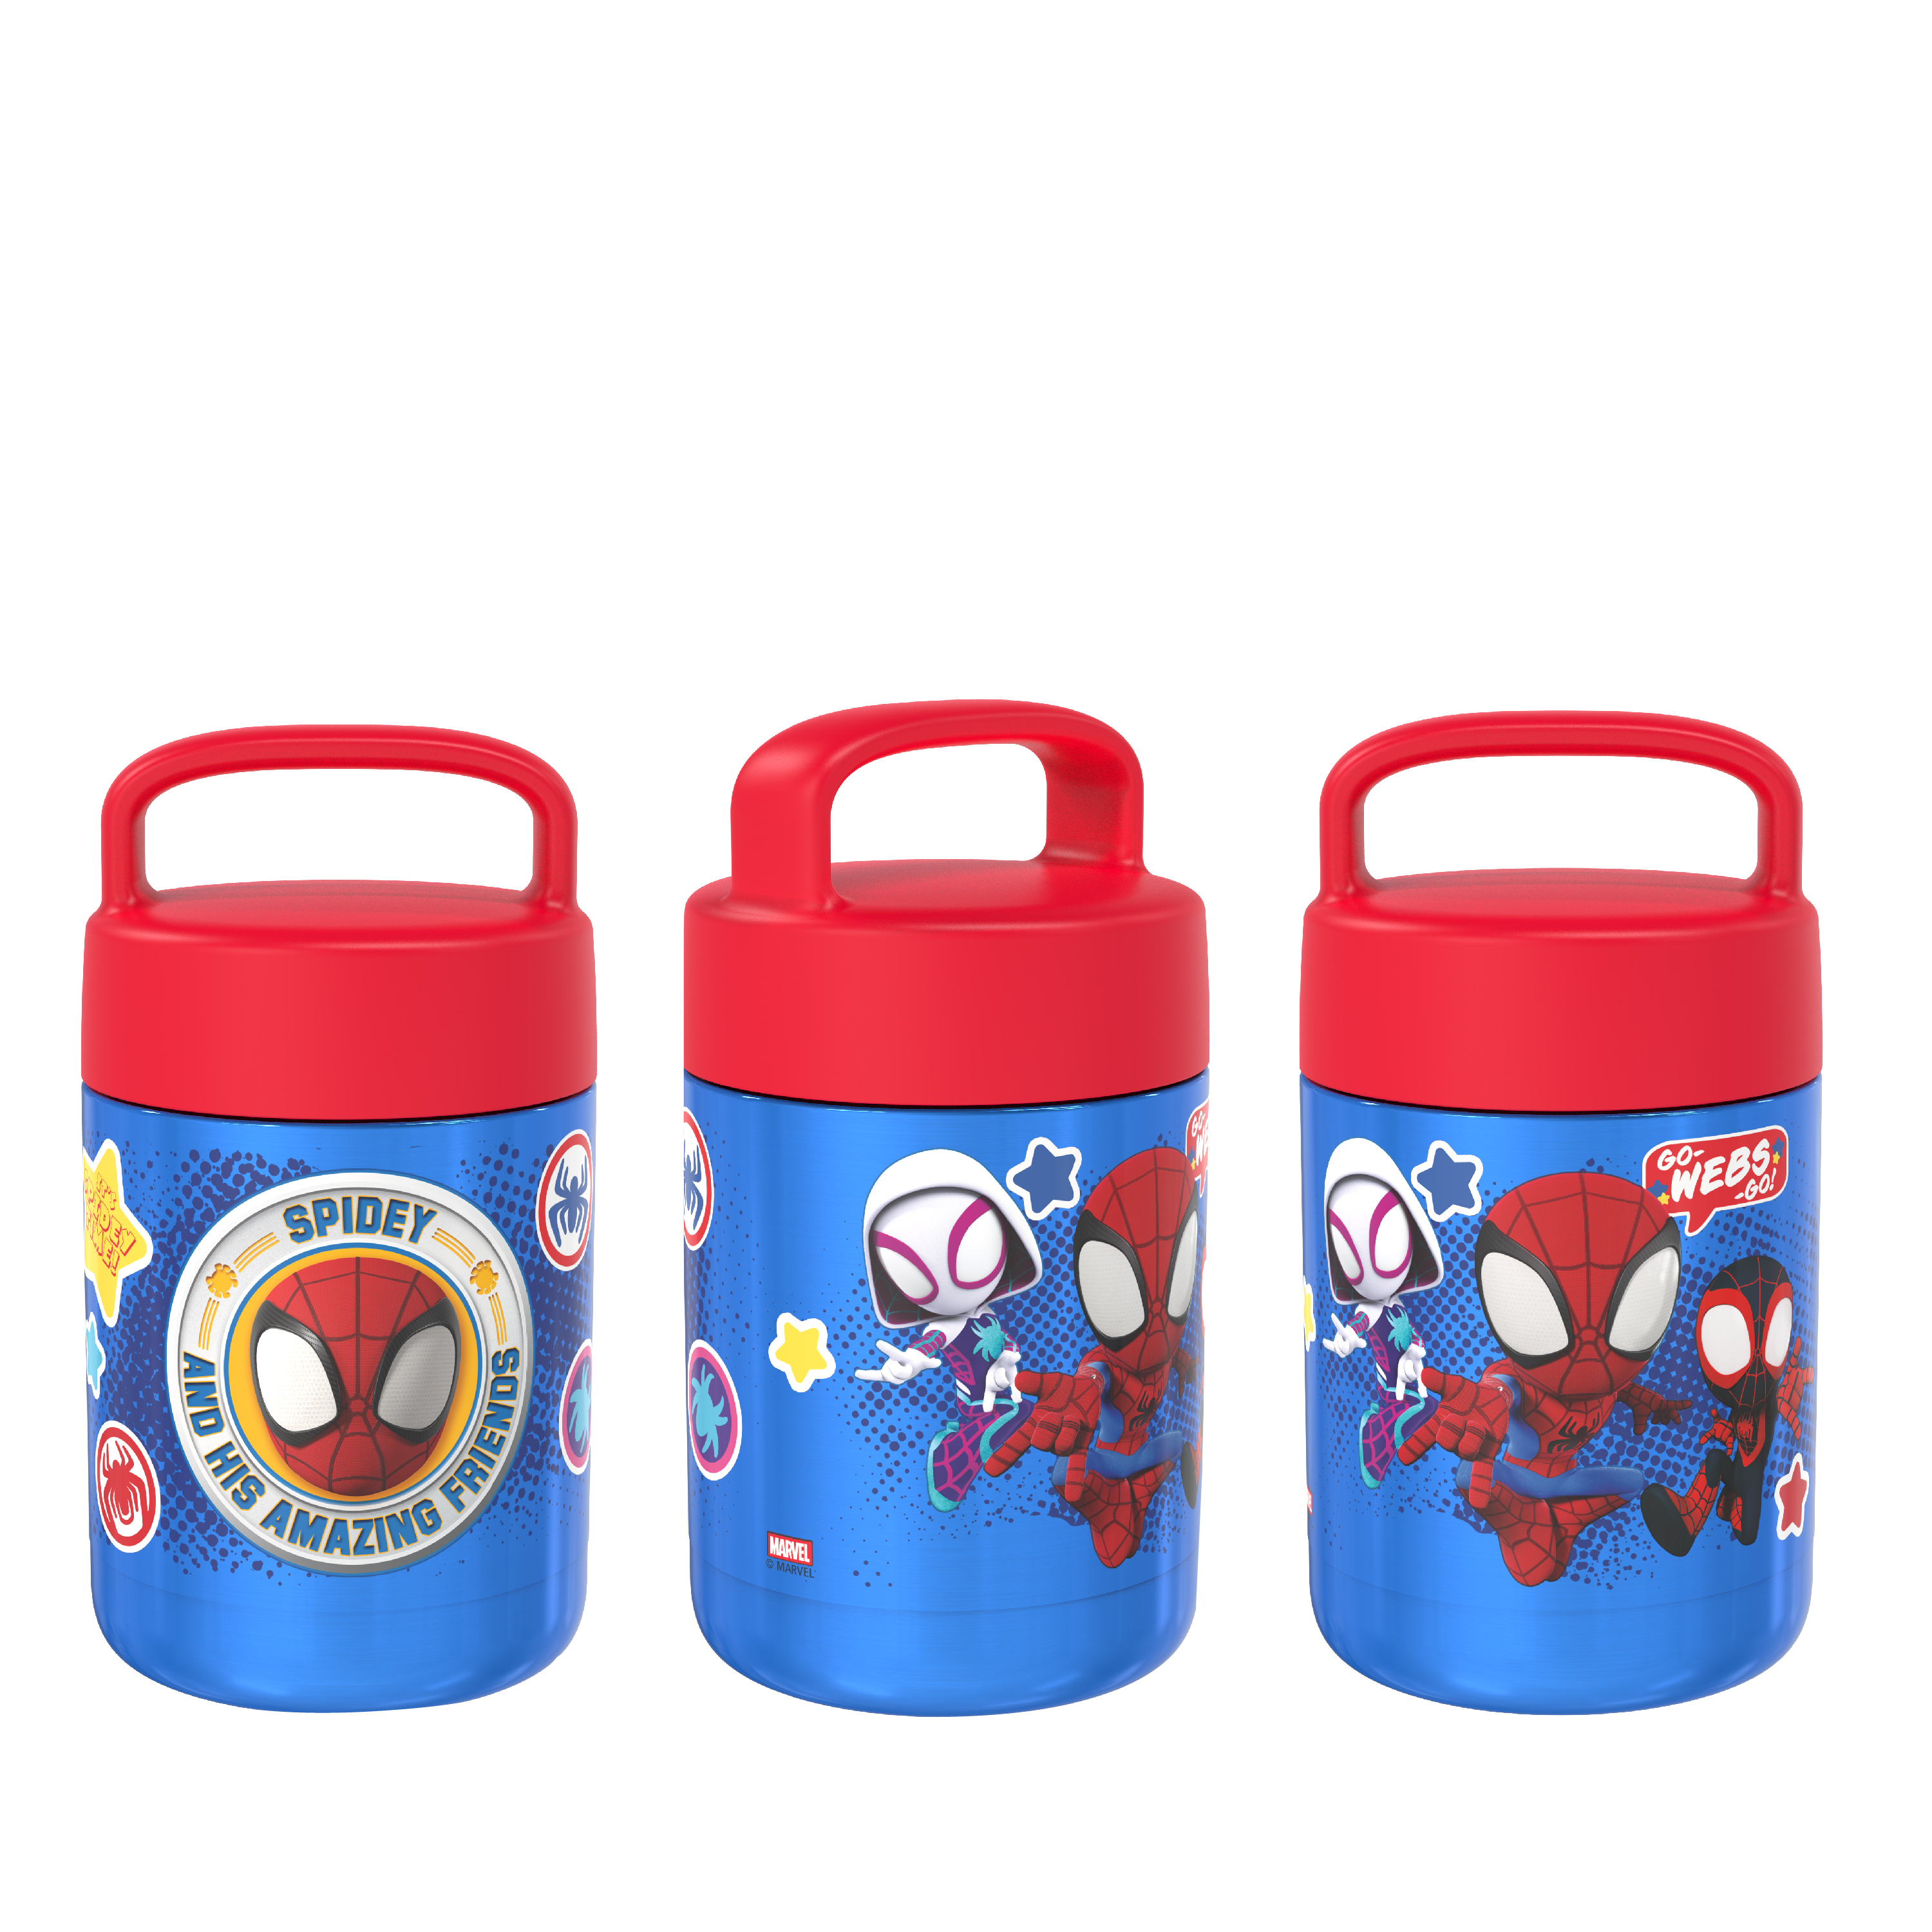 Spider-Man and His Amazing Friends Reusable Vacuum Insulated Stainless Steel Food Container, Spider-Friends slideshow image 4